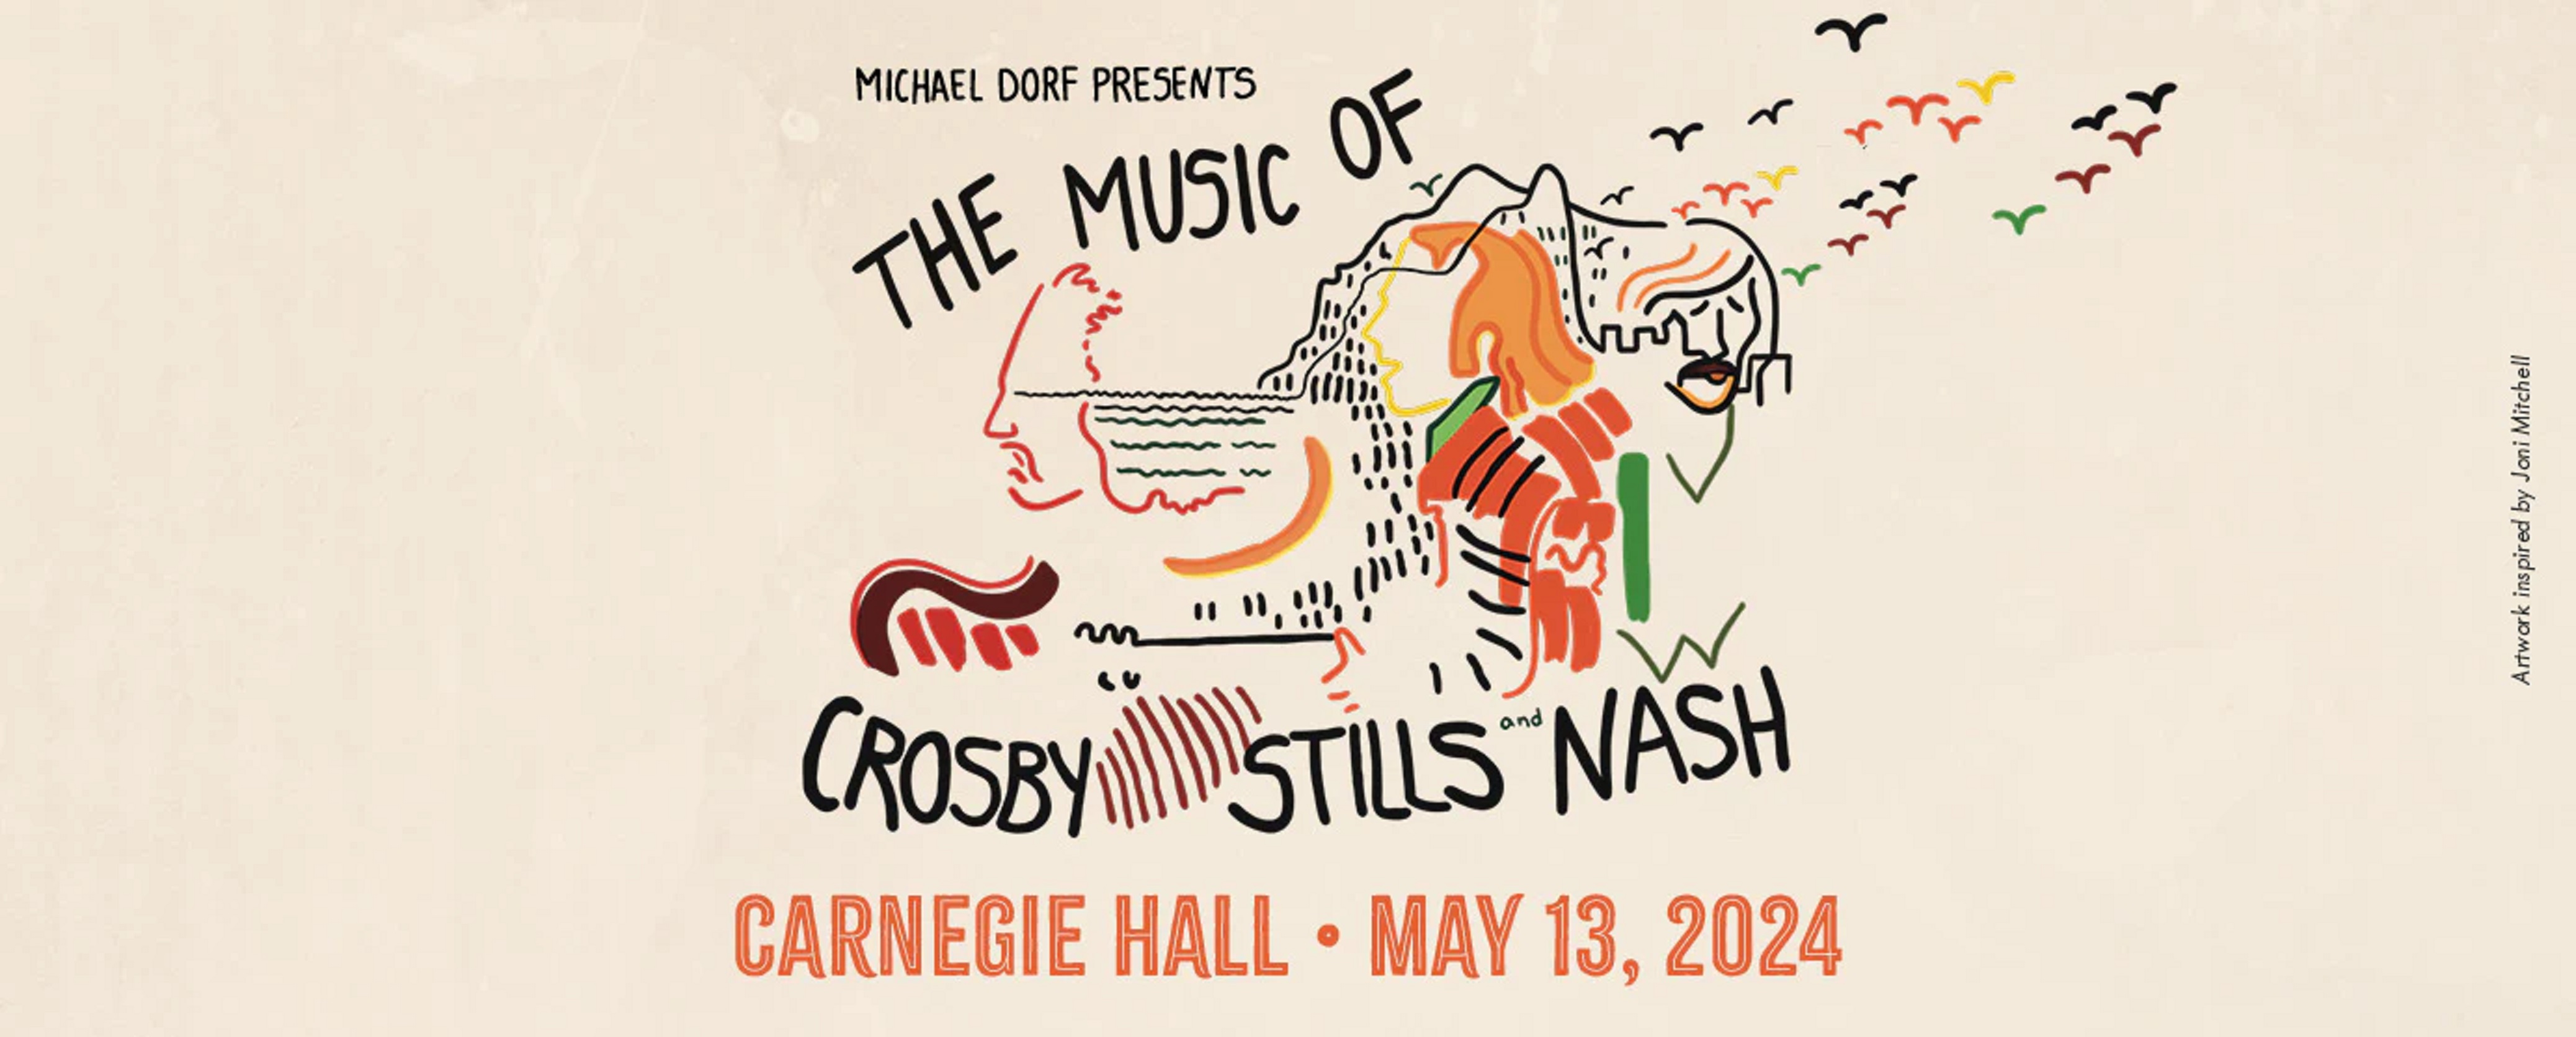 STEVE EARLE, GUSTER, A.C. NEWMAN, AND SARAH JAROSZ JOIN STAR-STUDDED LINEUP FOR THE MUSIC OF CROSBY, STILLS AND NASH AT CARNEGIE HALL